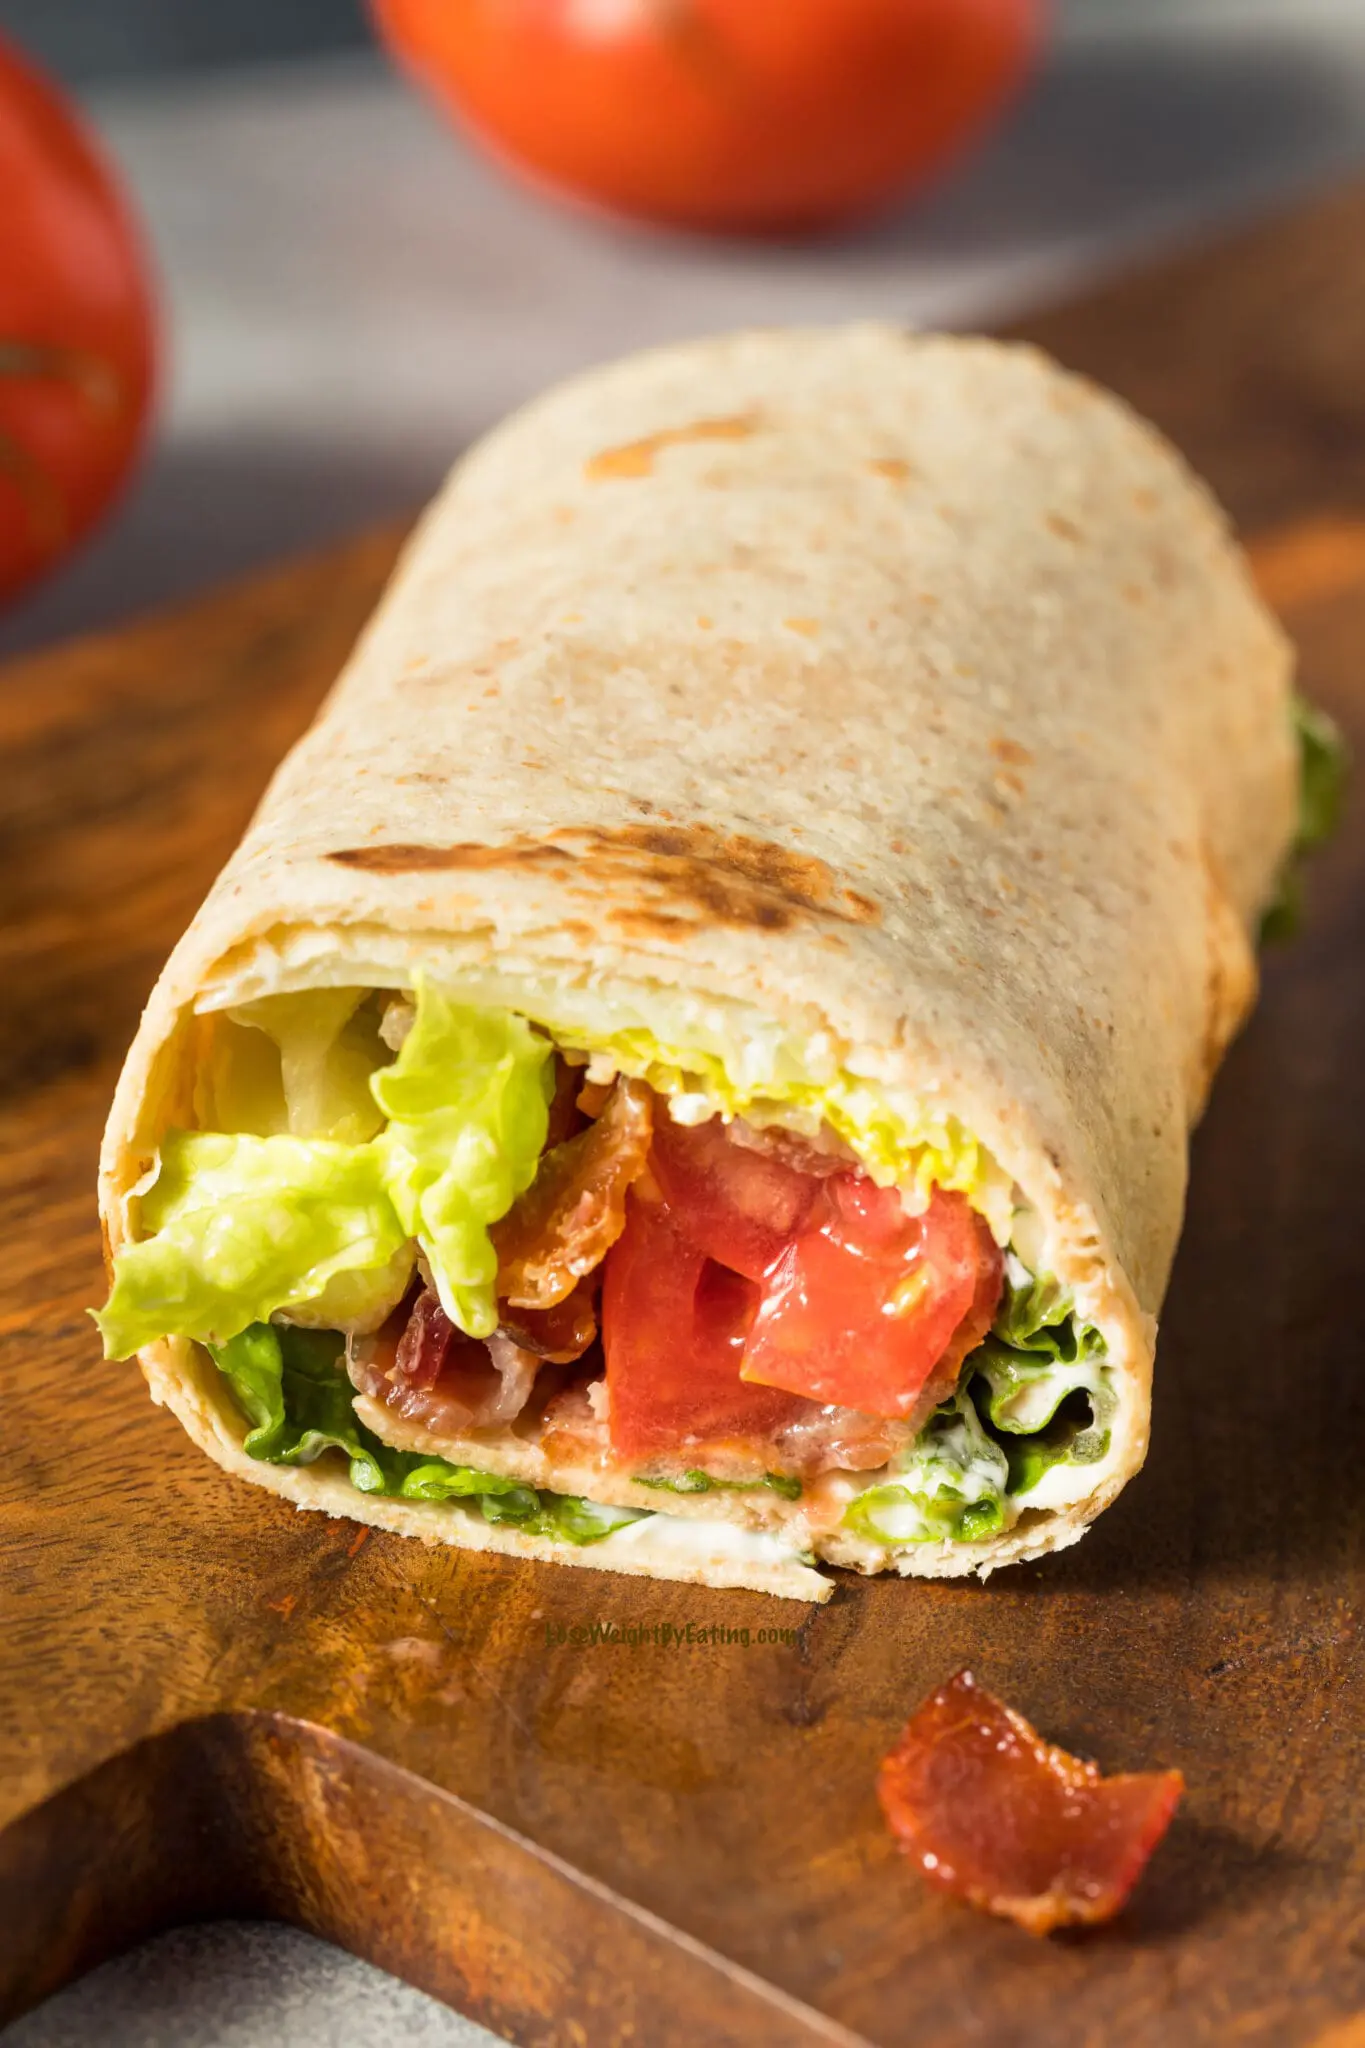 best healthy wrap recipes to lose weight
